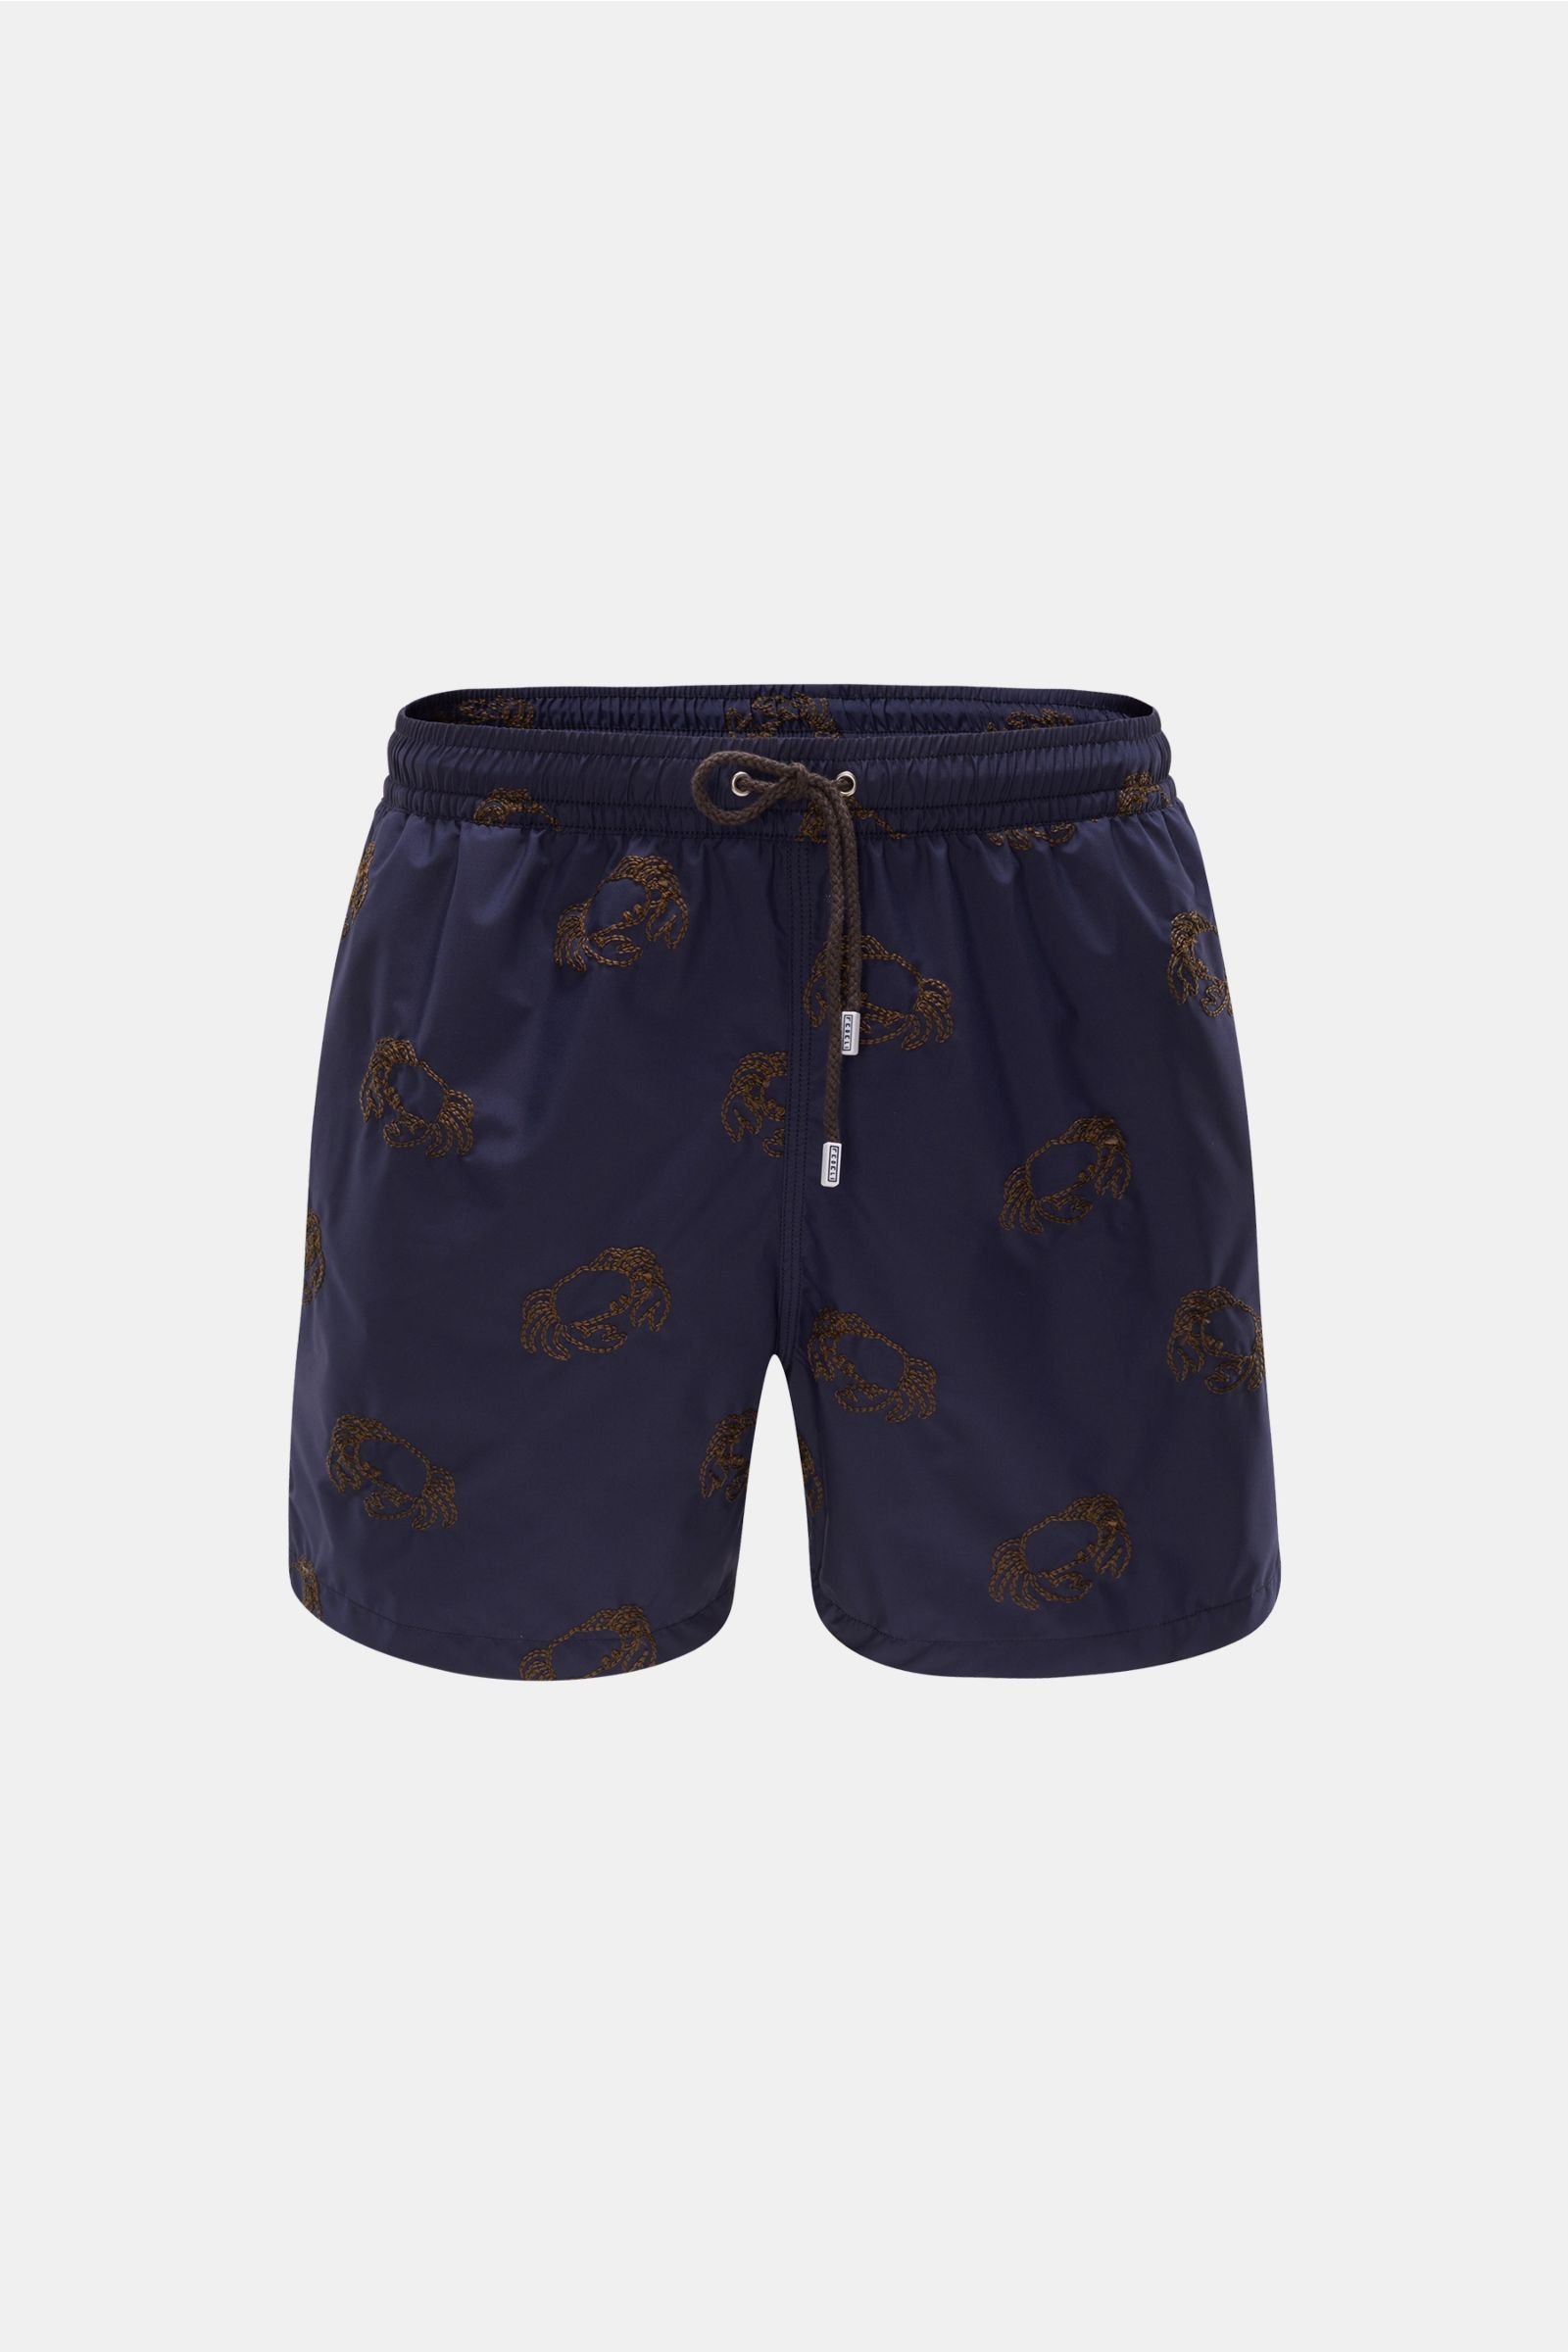 Swim shorts 'Madeira Airstop' navy/olive patterned